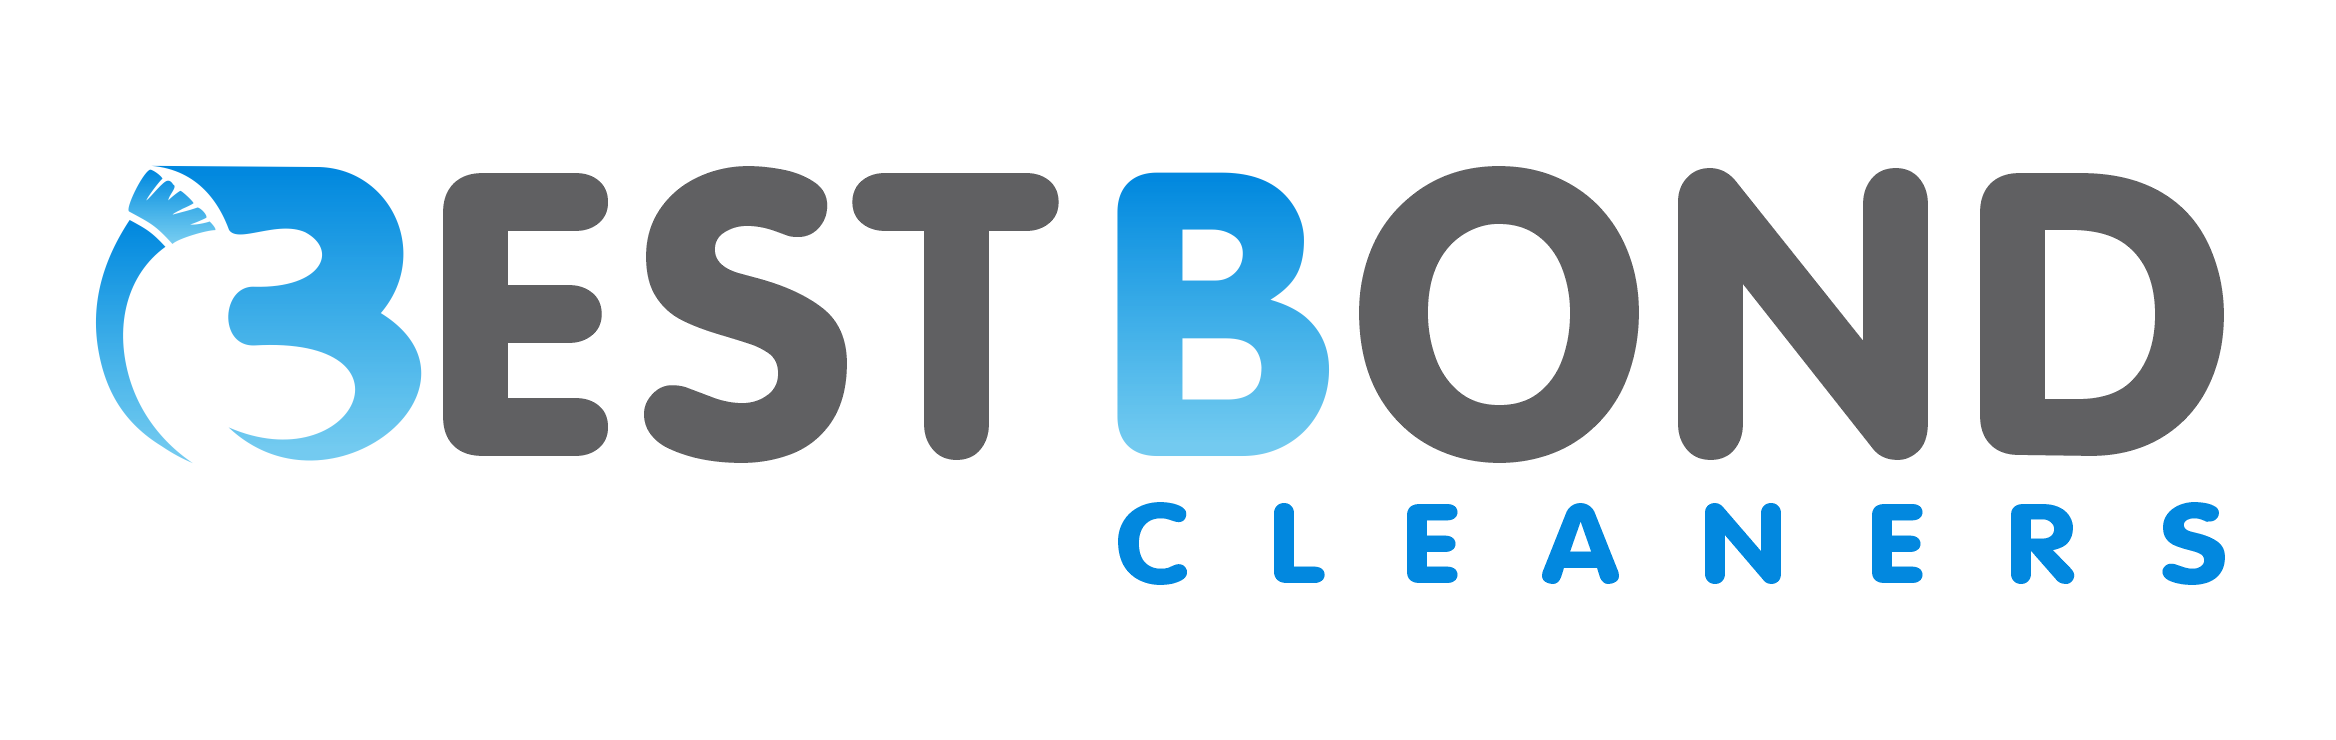 Best Bond Cleaning Services Gold Coast